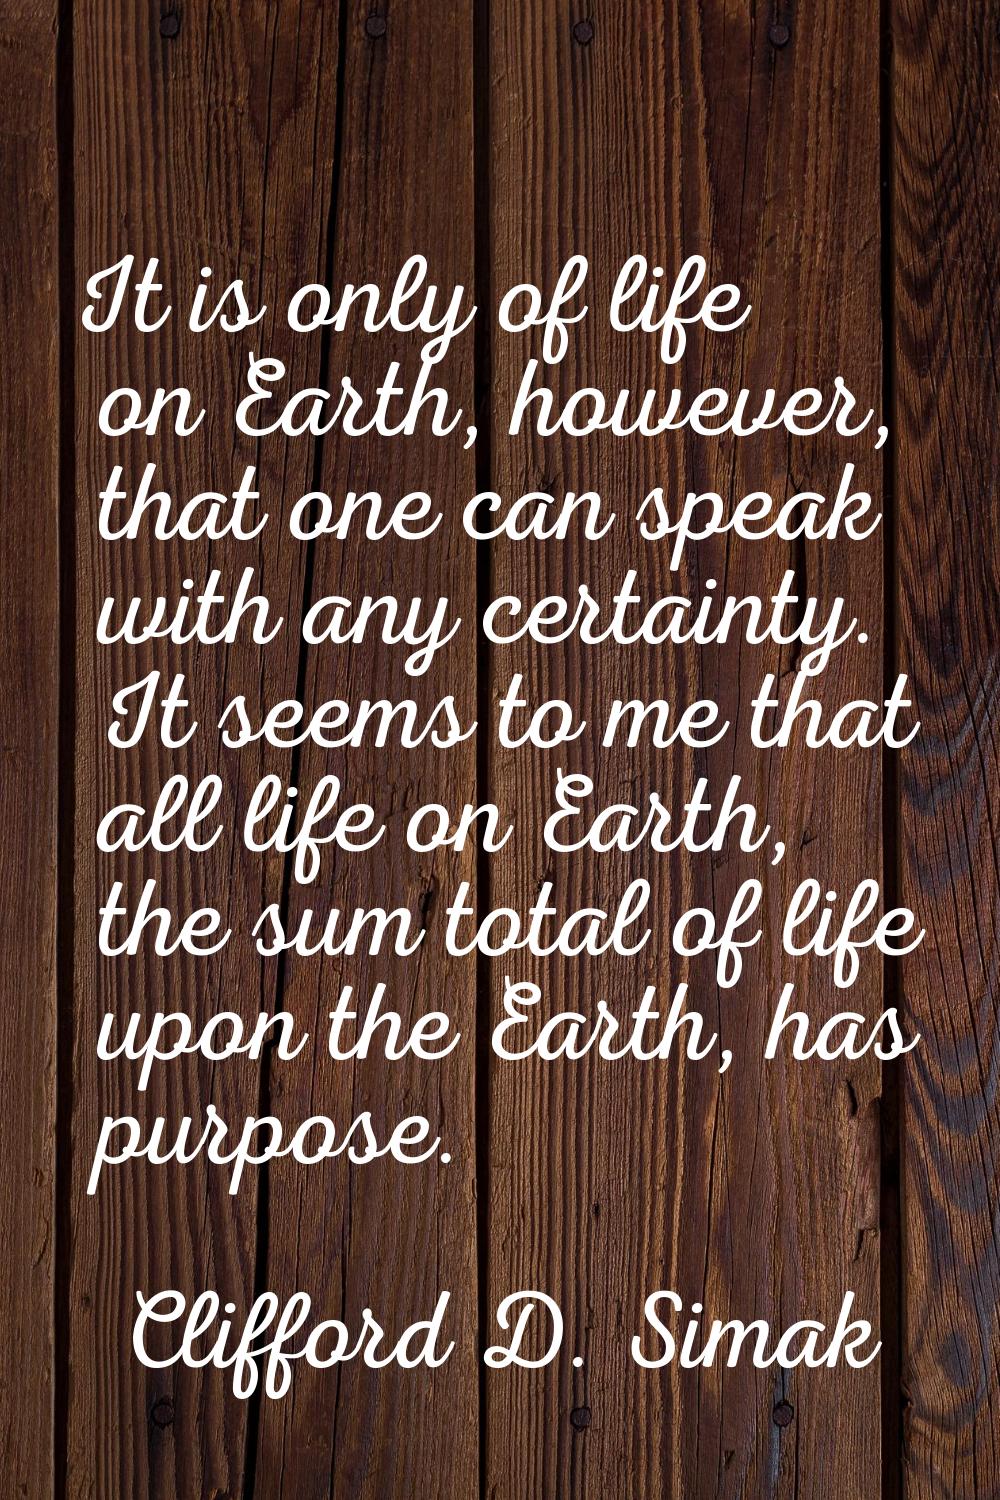 It is only of life on Earth, however, that one can speak with any certainty. It seems to me that al